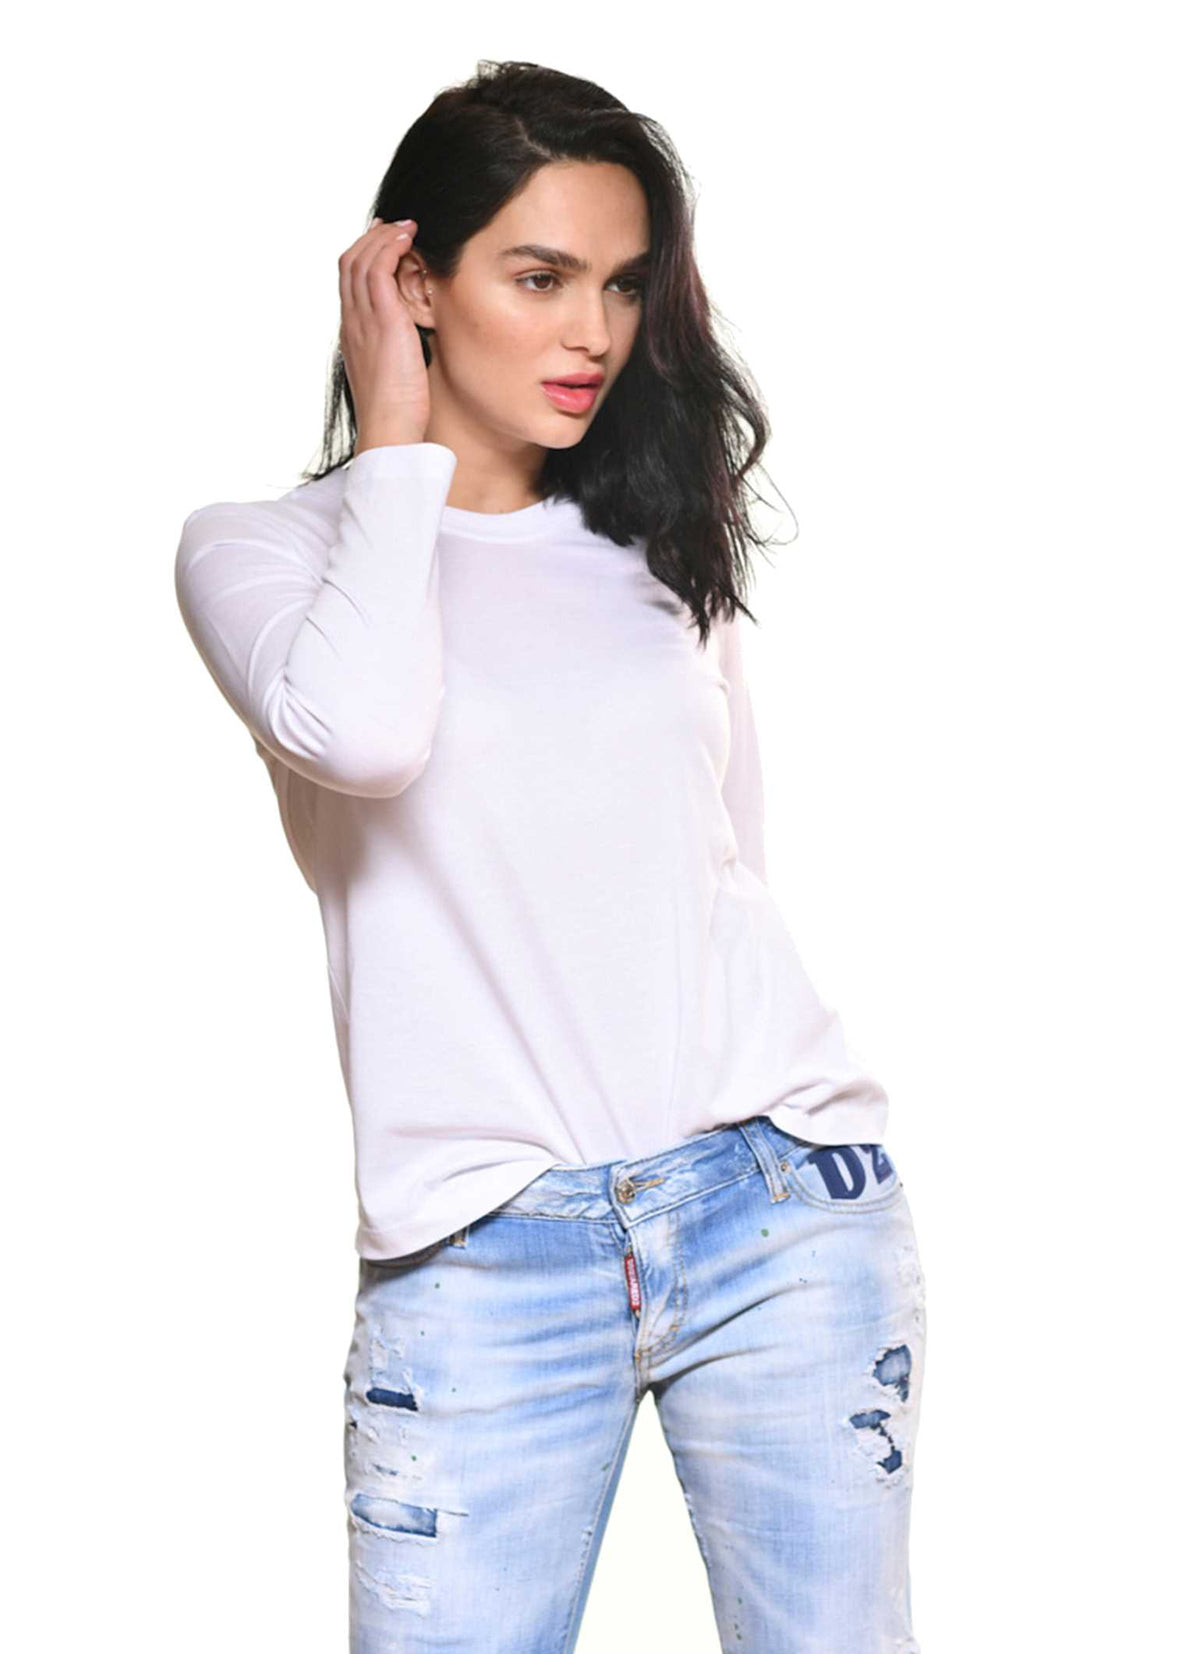 Women wearing long sleeve tees with round neck in color white from Carmen Sol with jeans